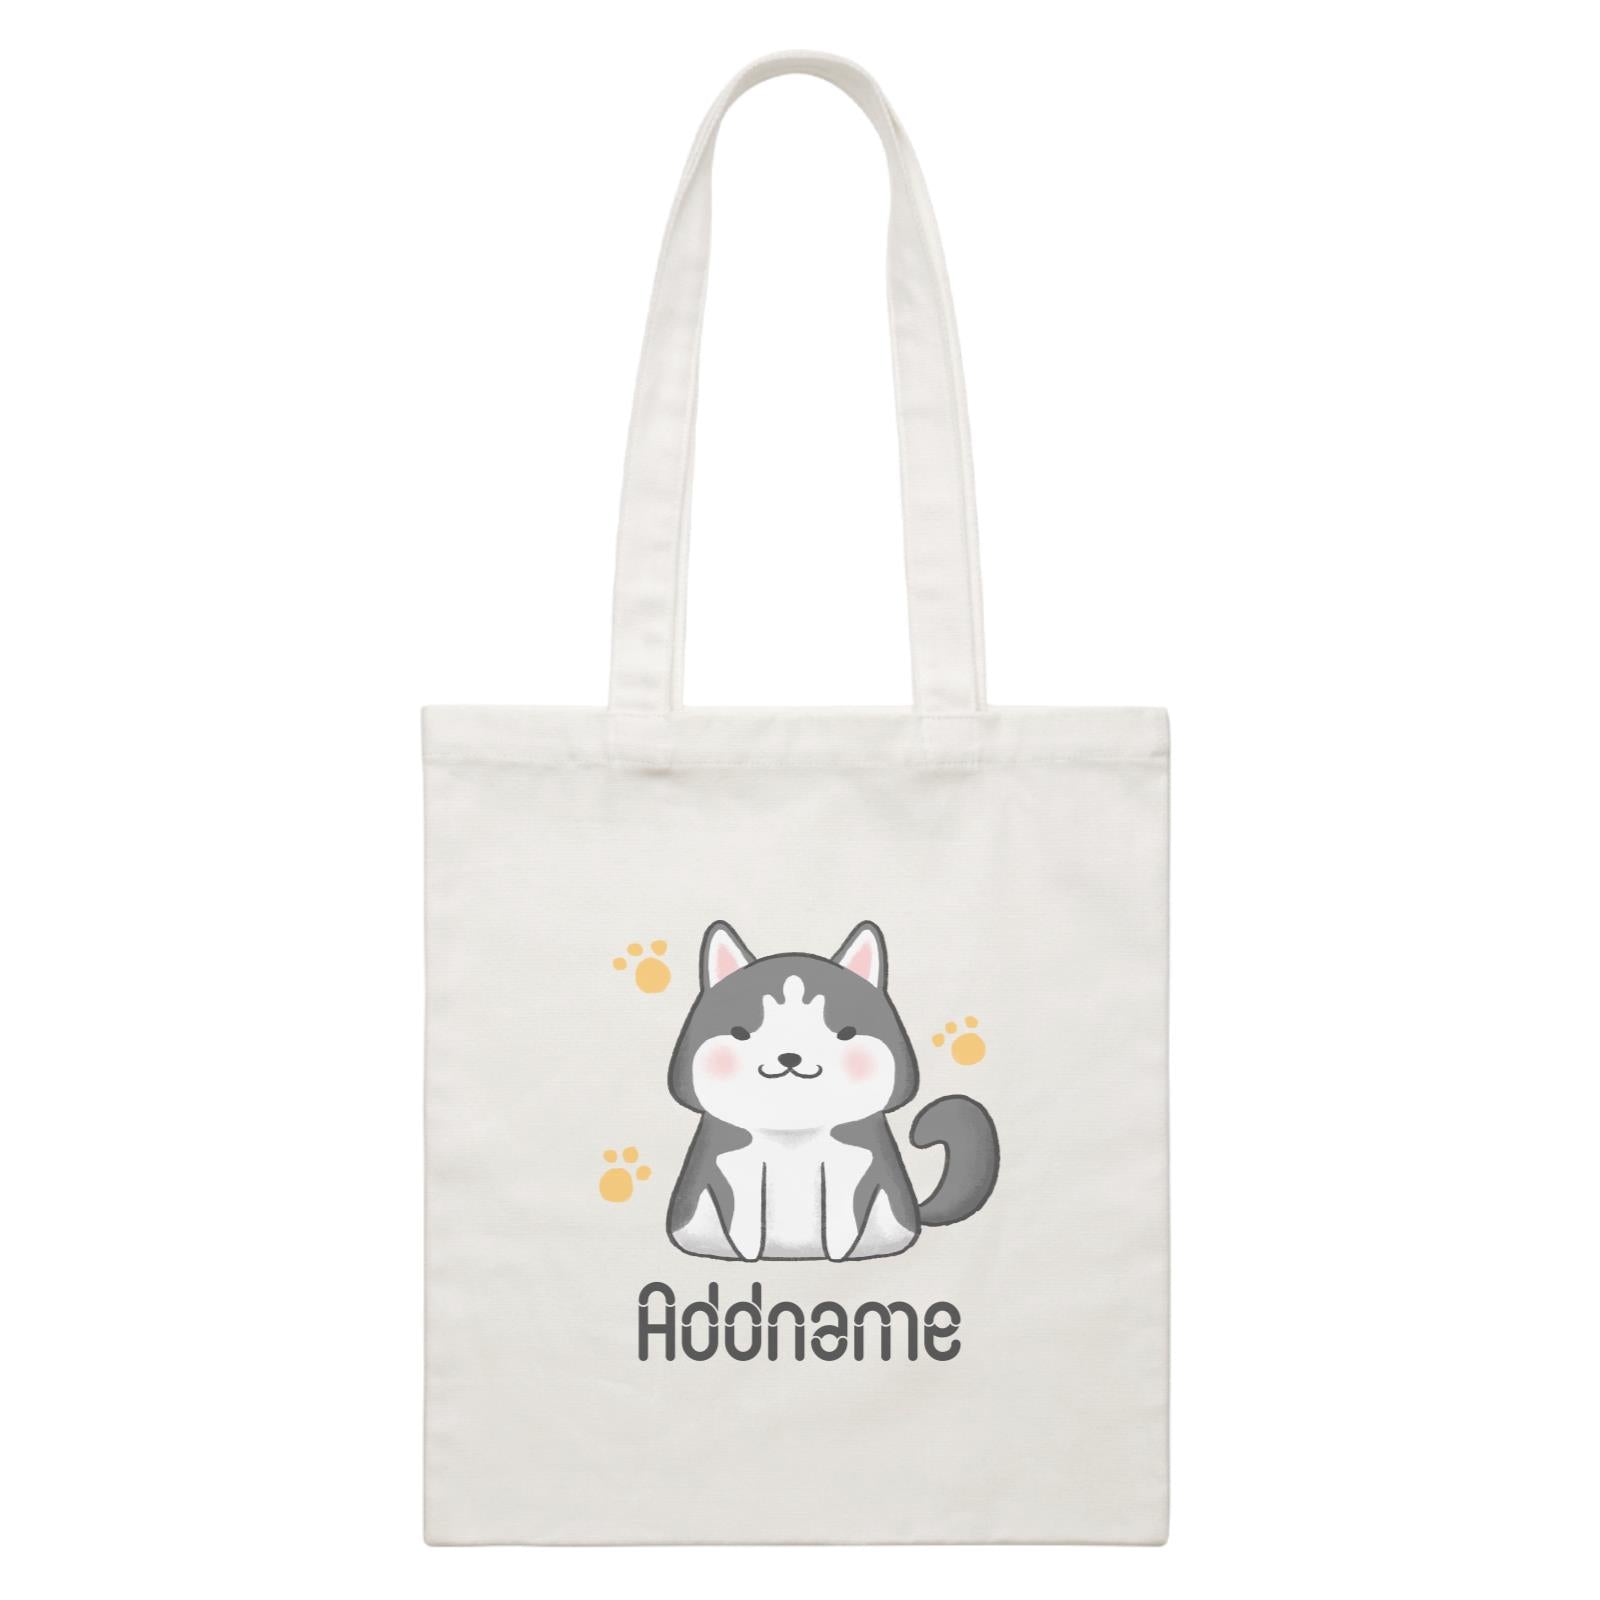 Cute Hand Drawn Style Husky Addname White Canvas Bag